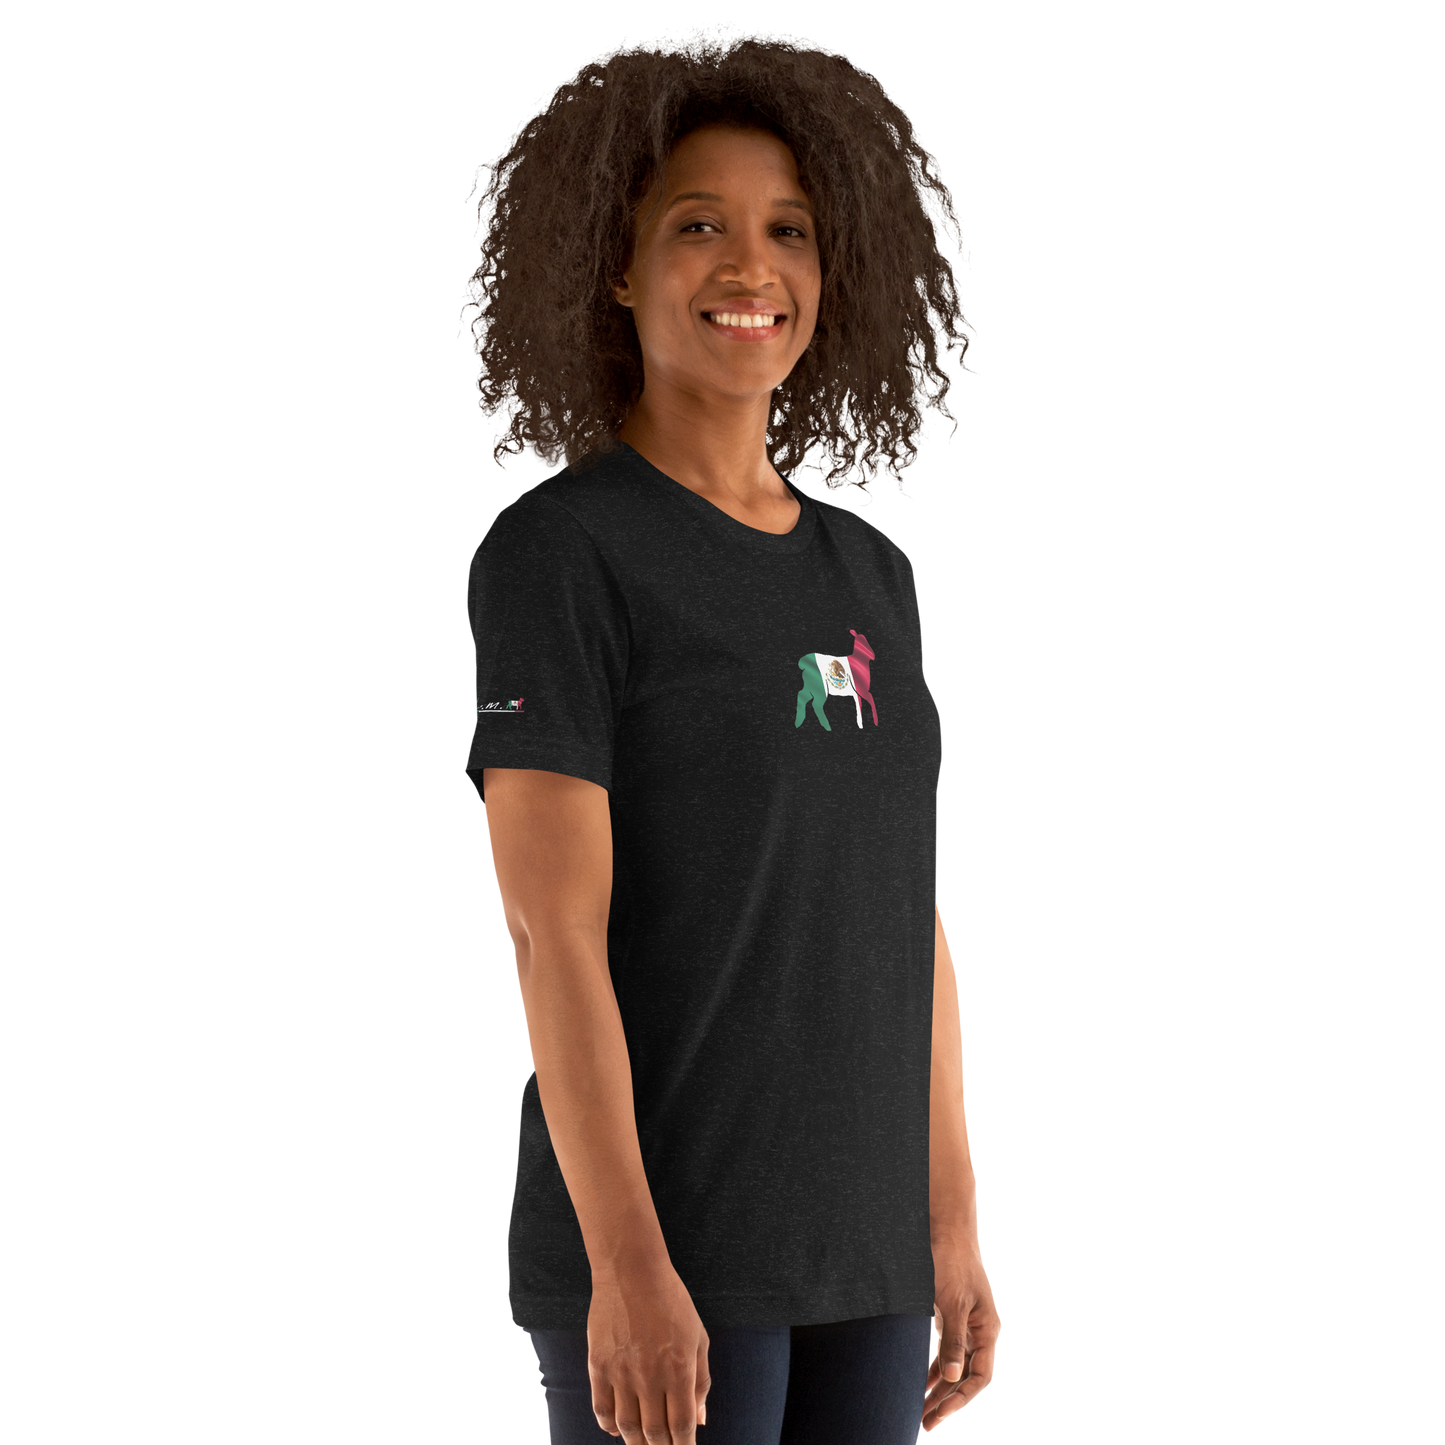 Unisex God & Country Mexico t-shirt